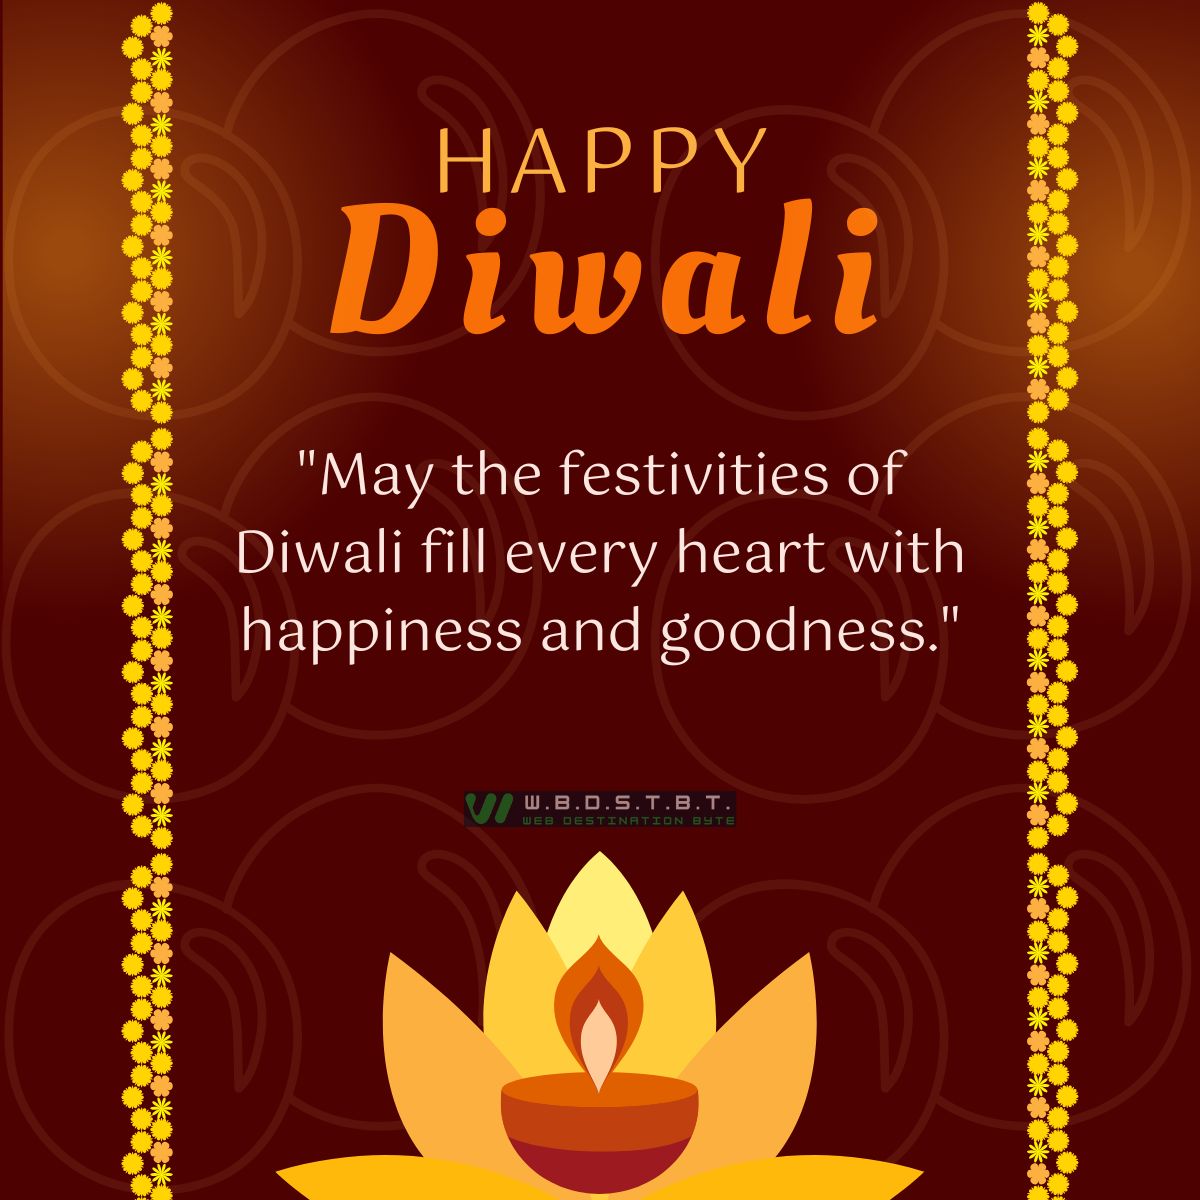 "May the festivities of Diwali fill every heart with happiness and goodness."